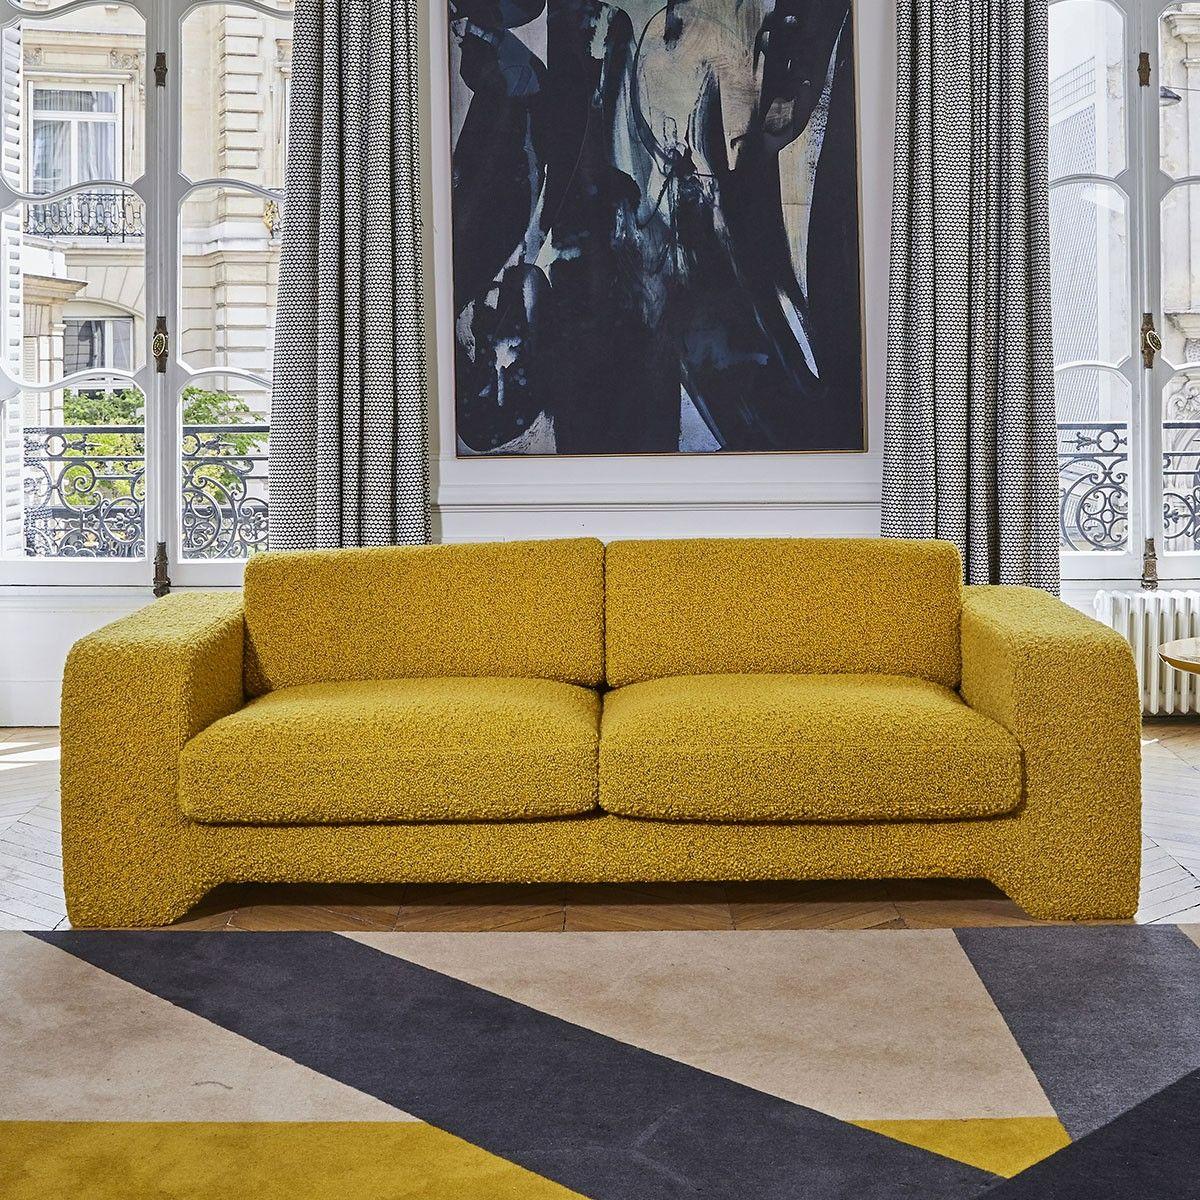 Popus Editions Giovanna 3 Seater Sofa in Khaki Como Velvet Upholstery.

Giovanna is a sofa with a strong profile. A sober, plush line, with this famous detail that changes everything, so as not to forget its strength of character and this charming